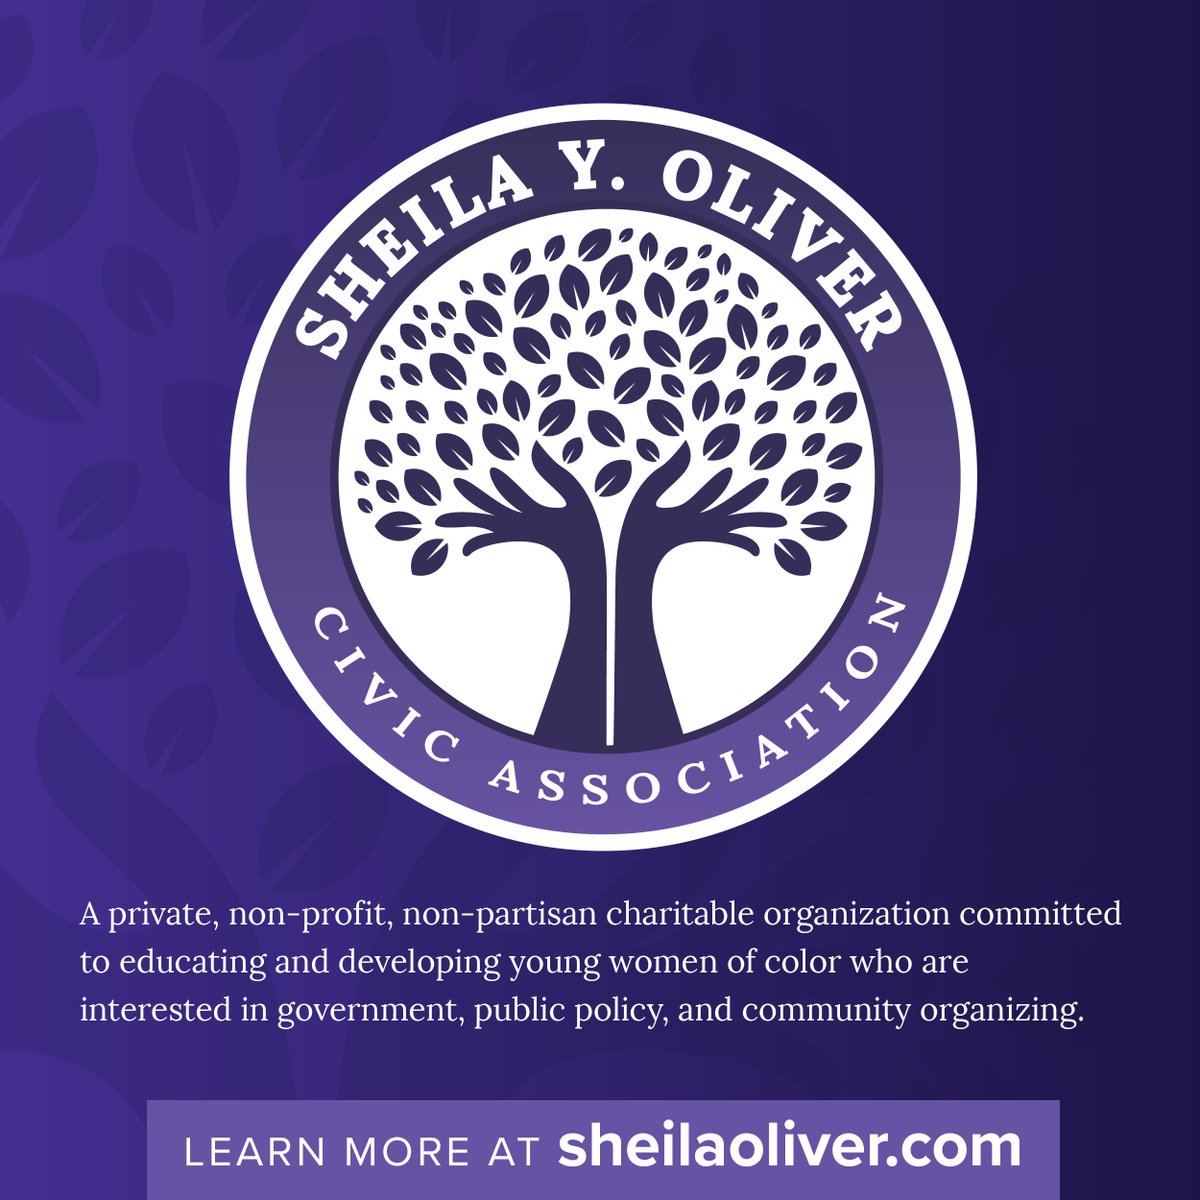 Lieutenant Governor Oliver’s legacy will live on through the Sheila Y. Oliver Civic Association – creating pathways for young women to pursue careers in government, public policy, and community organizing. Follow the work of the Foundation here: @sheilayoliver